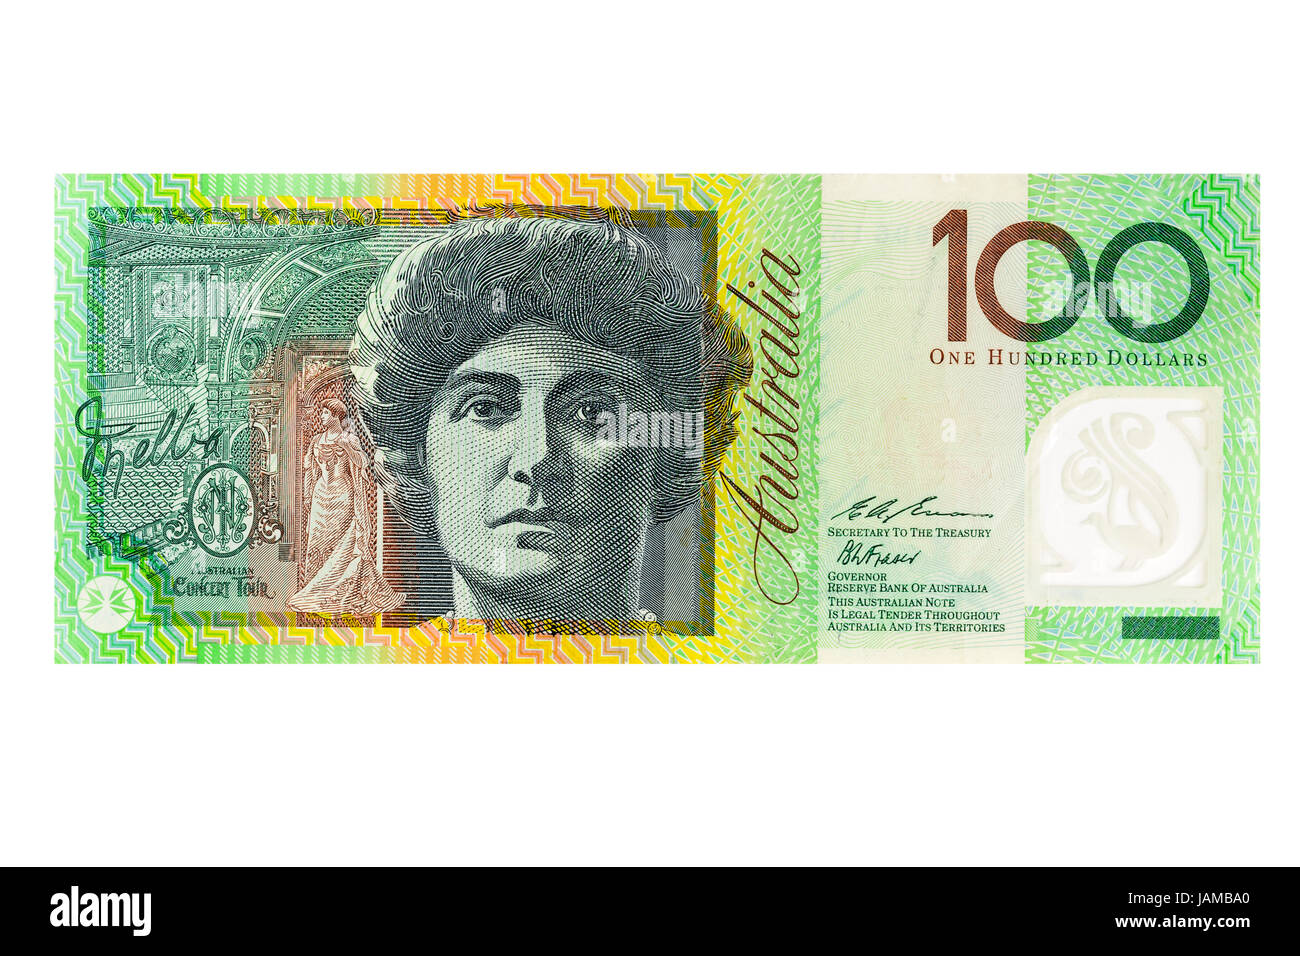 Australian one hundred dollar banknote on a white background Stock Photo